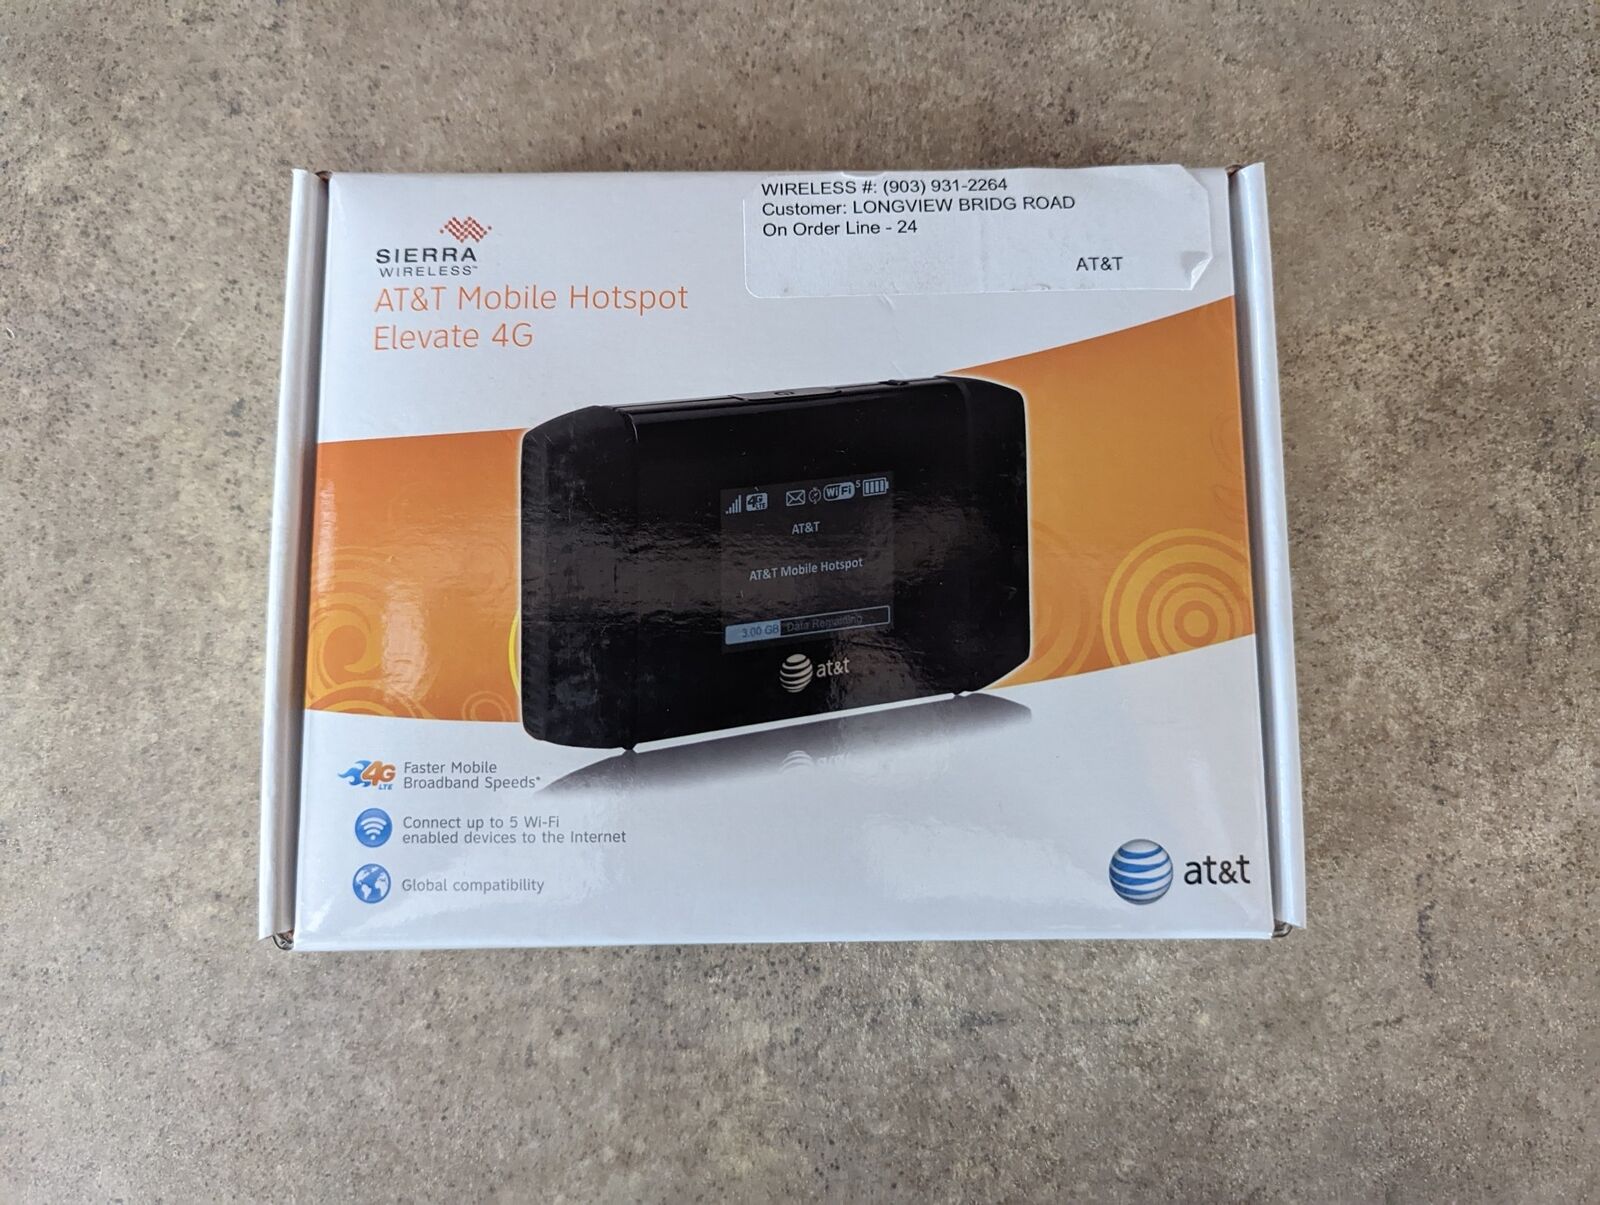 AT&T SIERRA WIRELESS MOBILE HOTSPOT WIFI ELEVATE 4G ROUTER AIRCARD 754S URS2-7